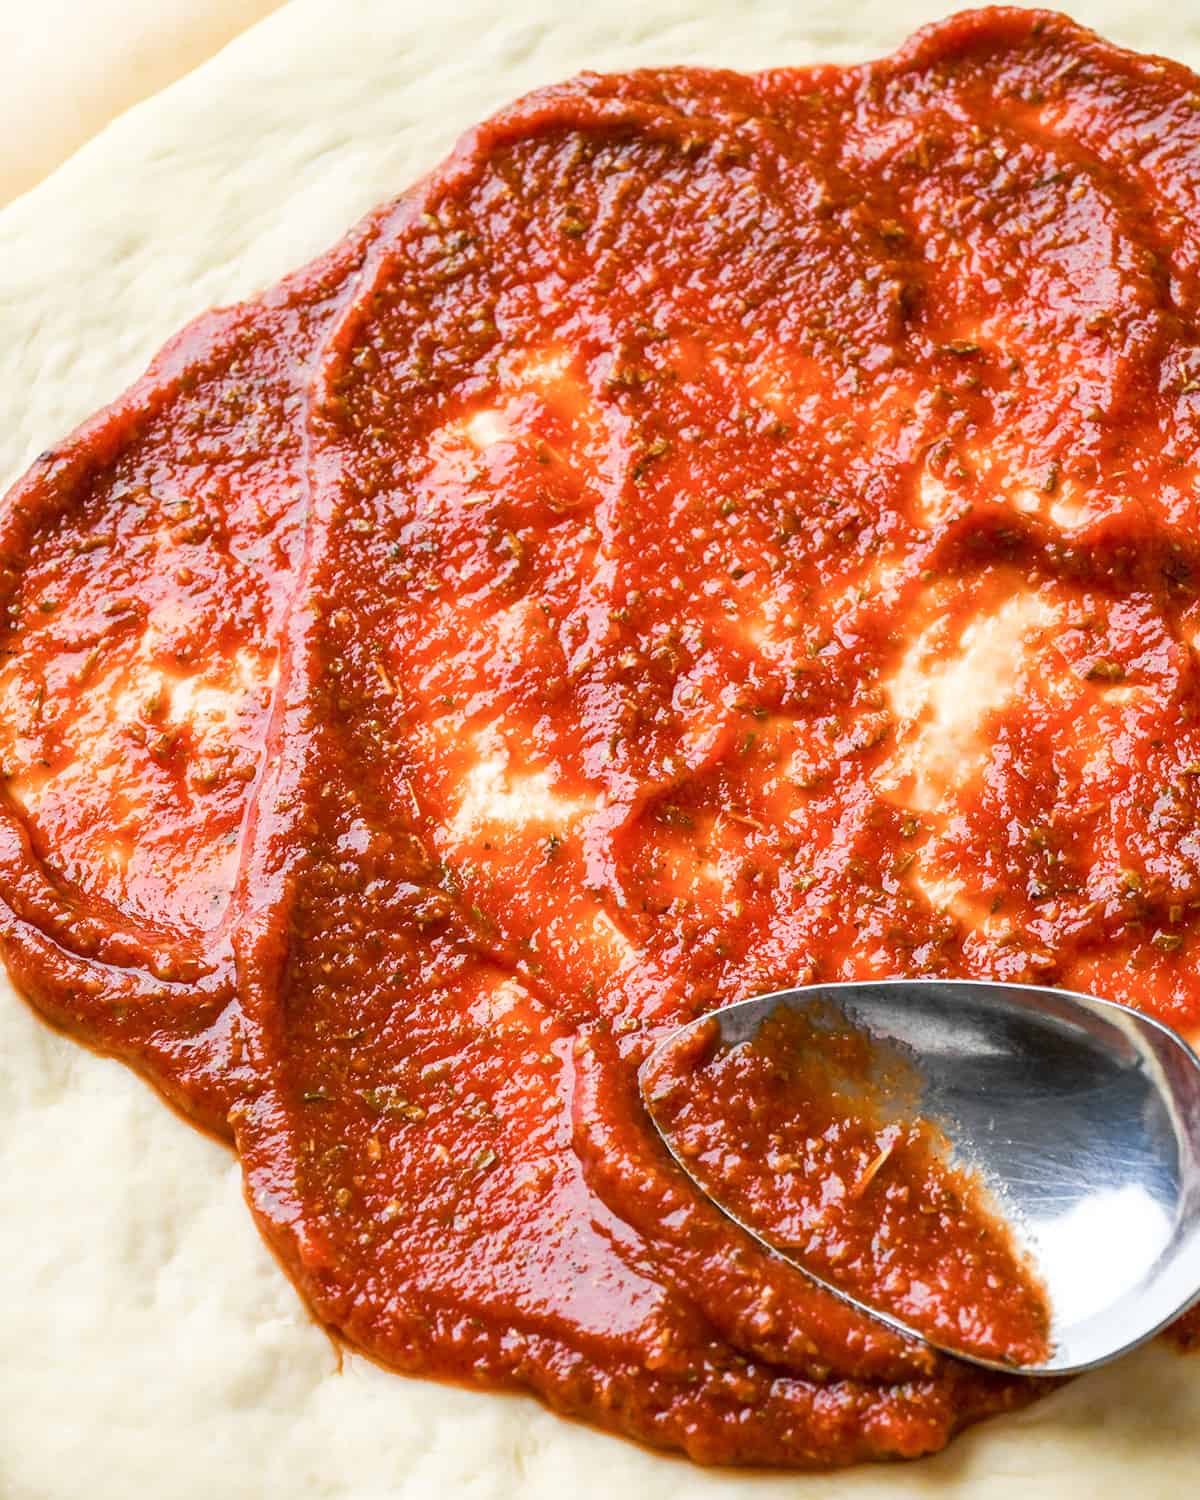 How to Make Pizza - spreading sauce on dough